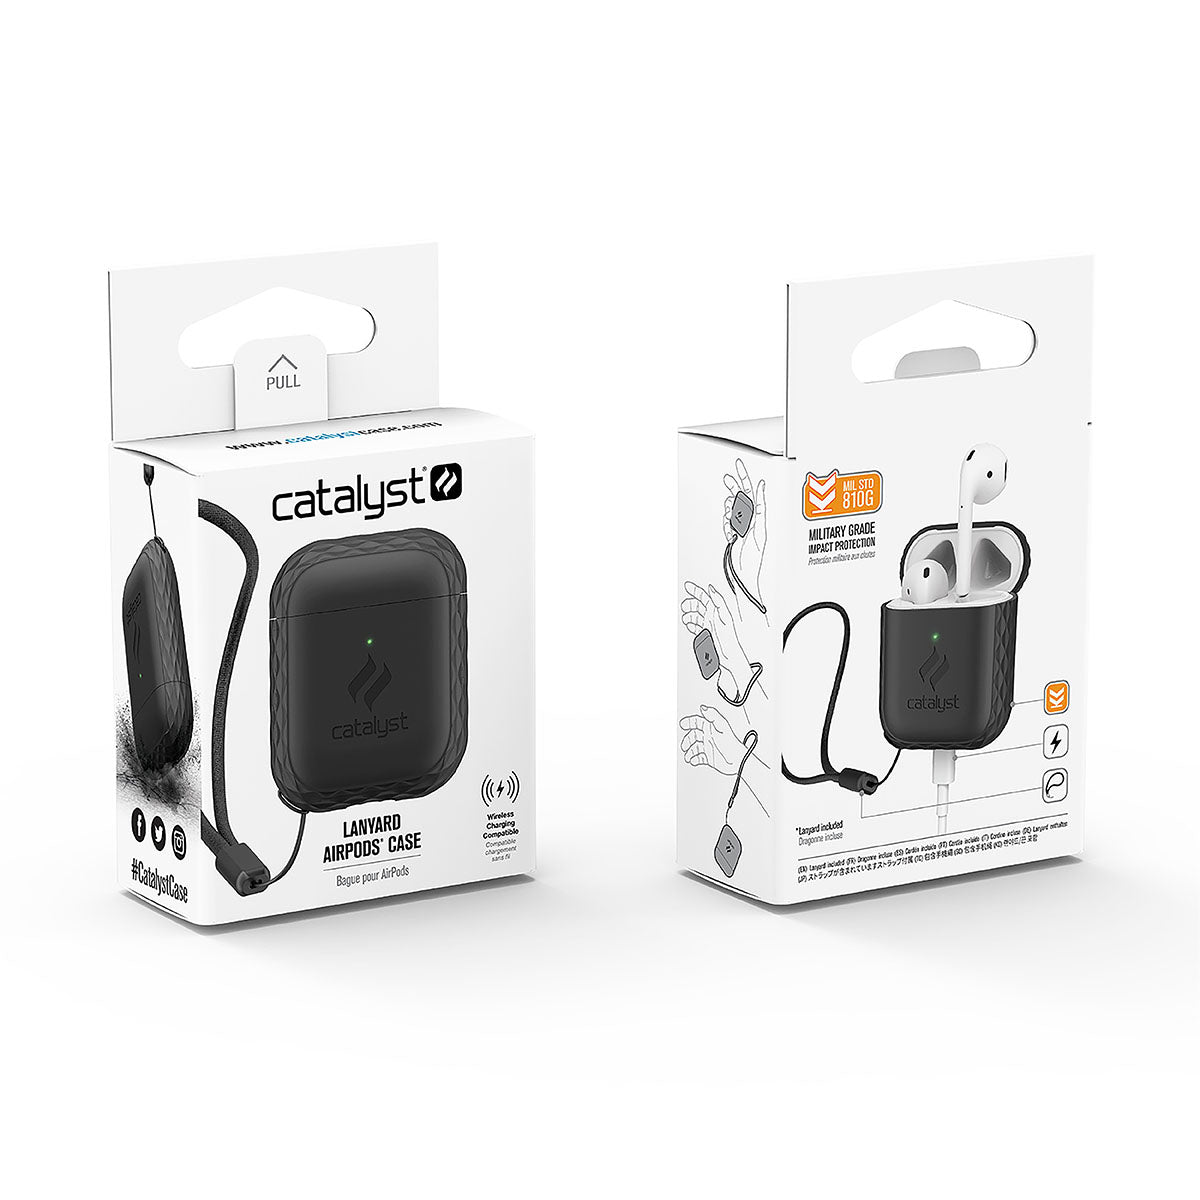 Catalyst airpods gen2/1 case plus lanyard showing the front and back of the packaging